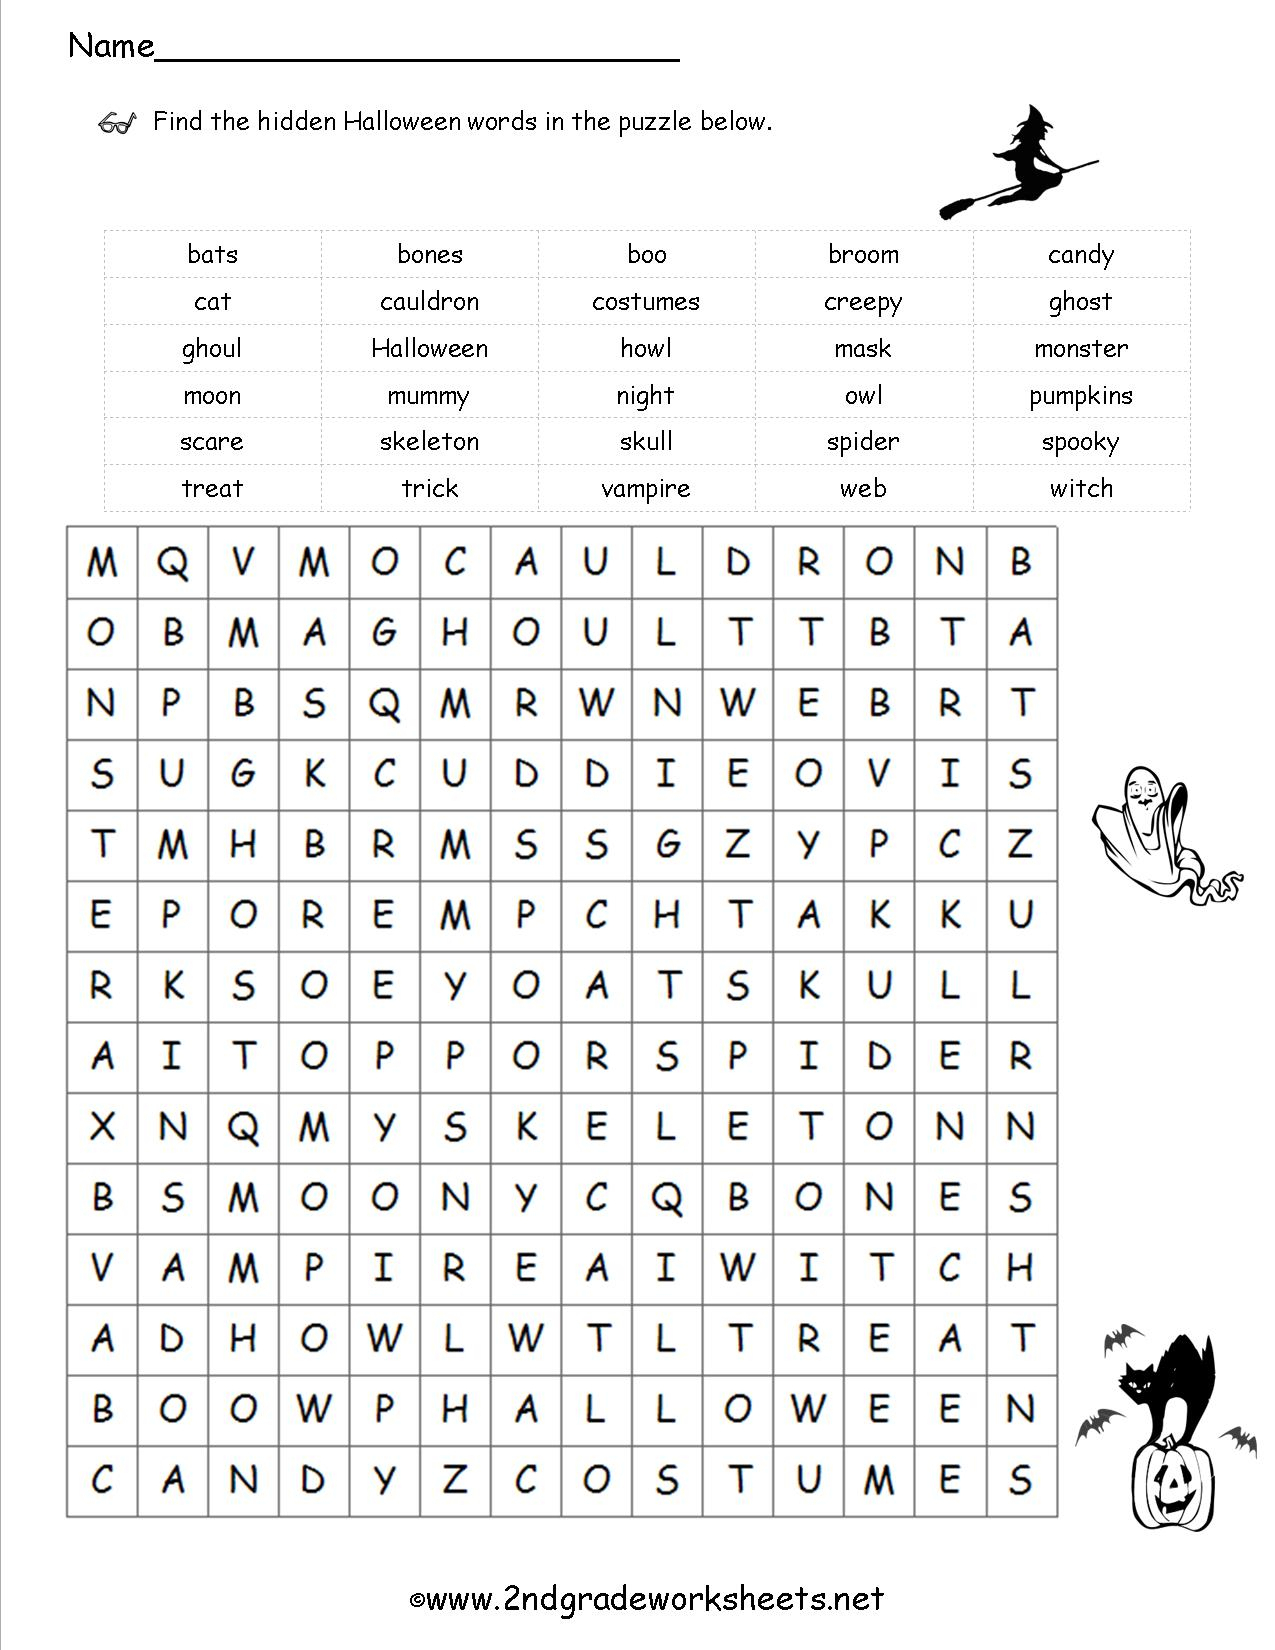 Halloween Worksheets And Printouts - Halloween Puzzle Printable Free